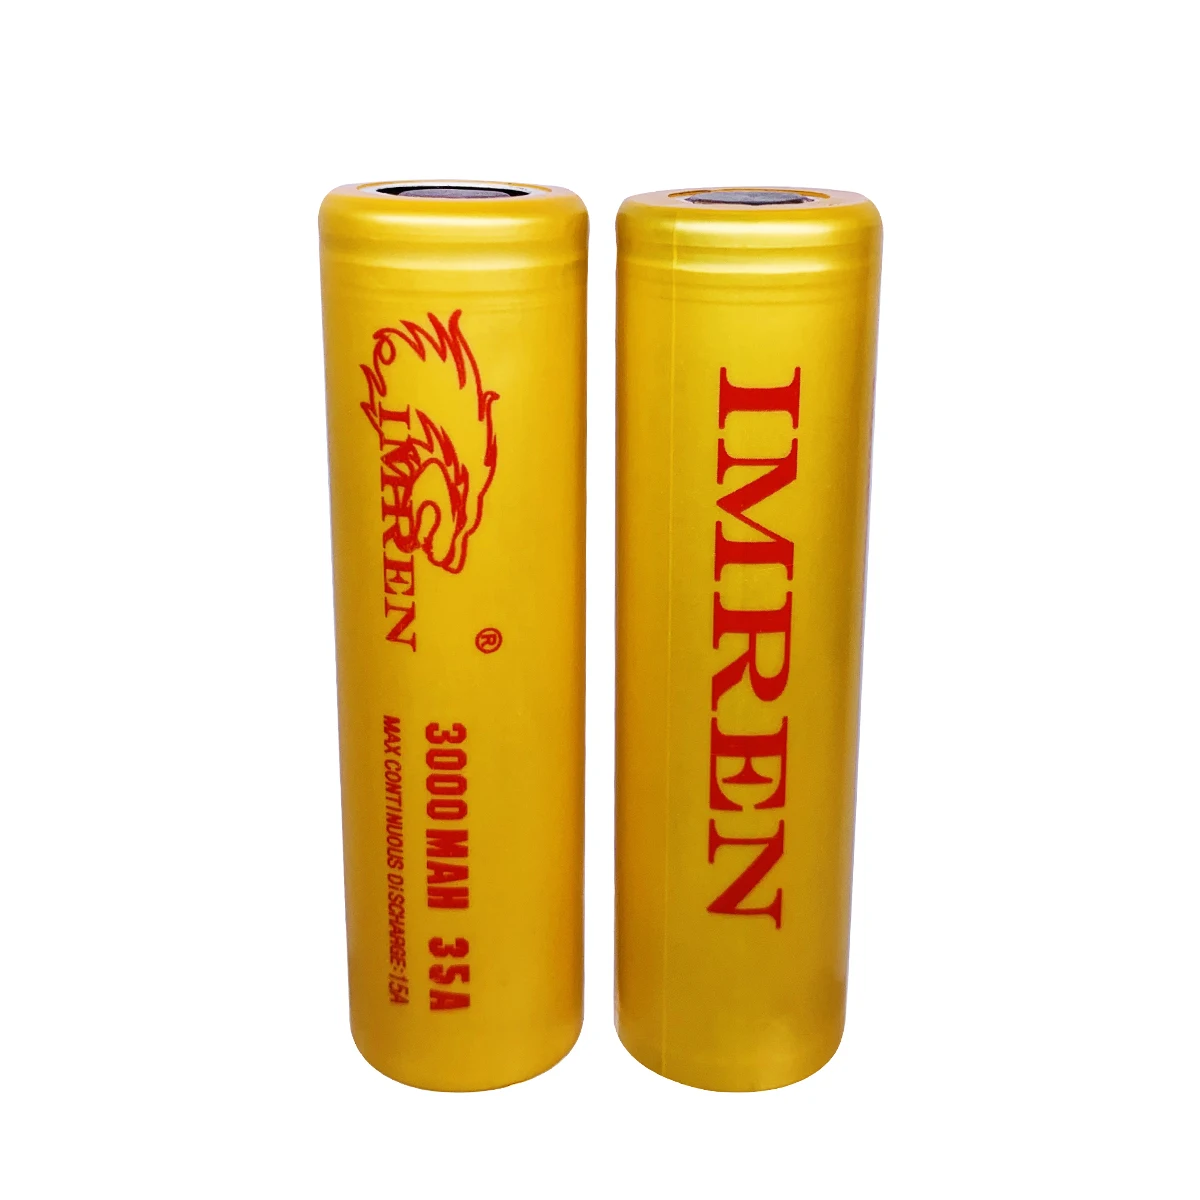 Imren  IMR18650  3000MAH 15A/35A gold color Battery   lithium rechargeable batterie 18650